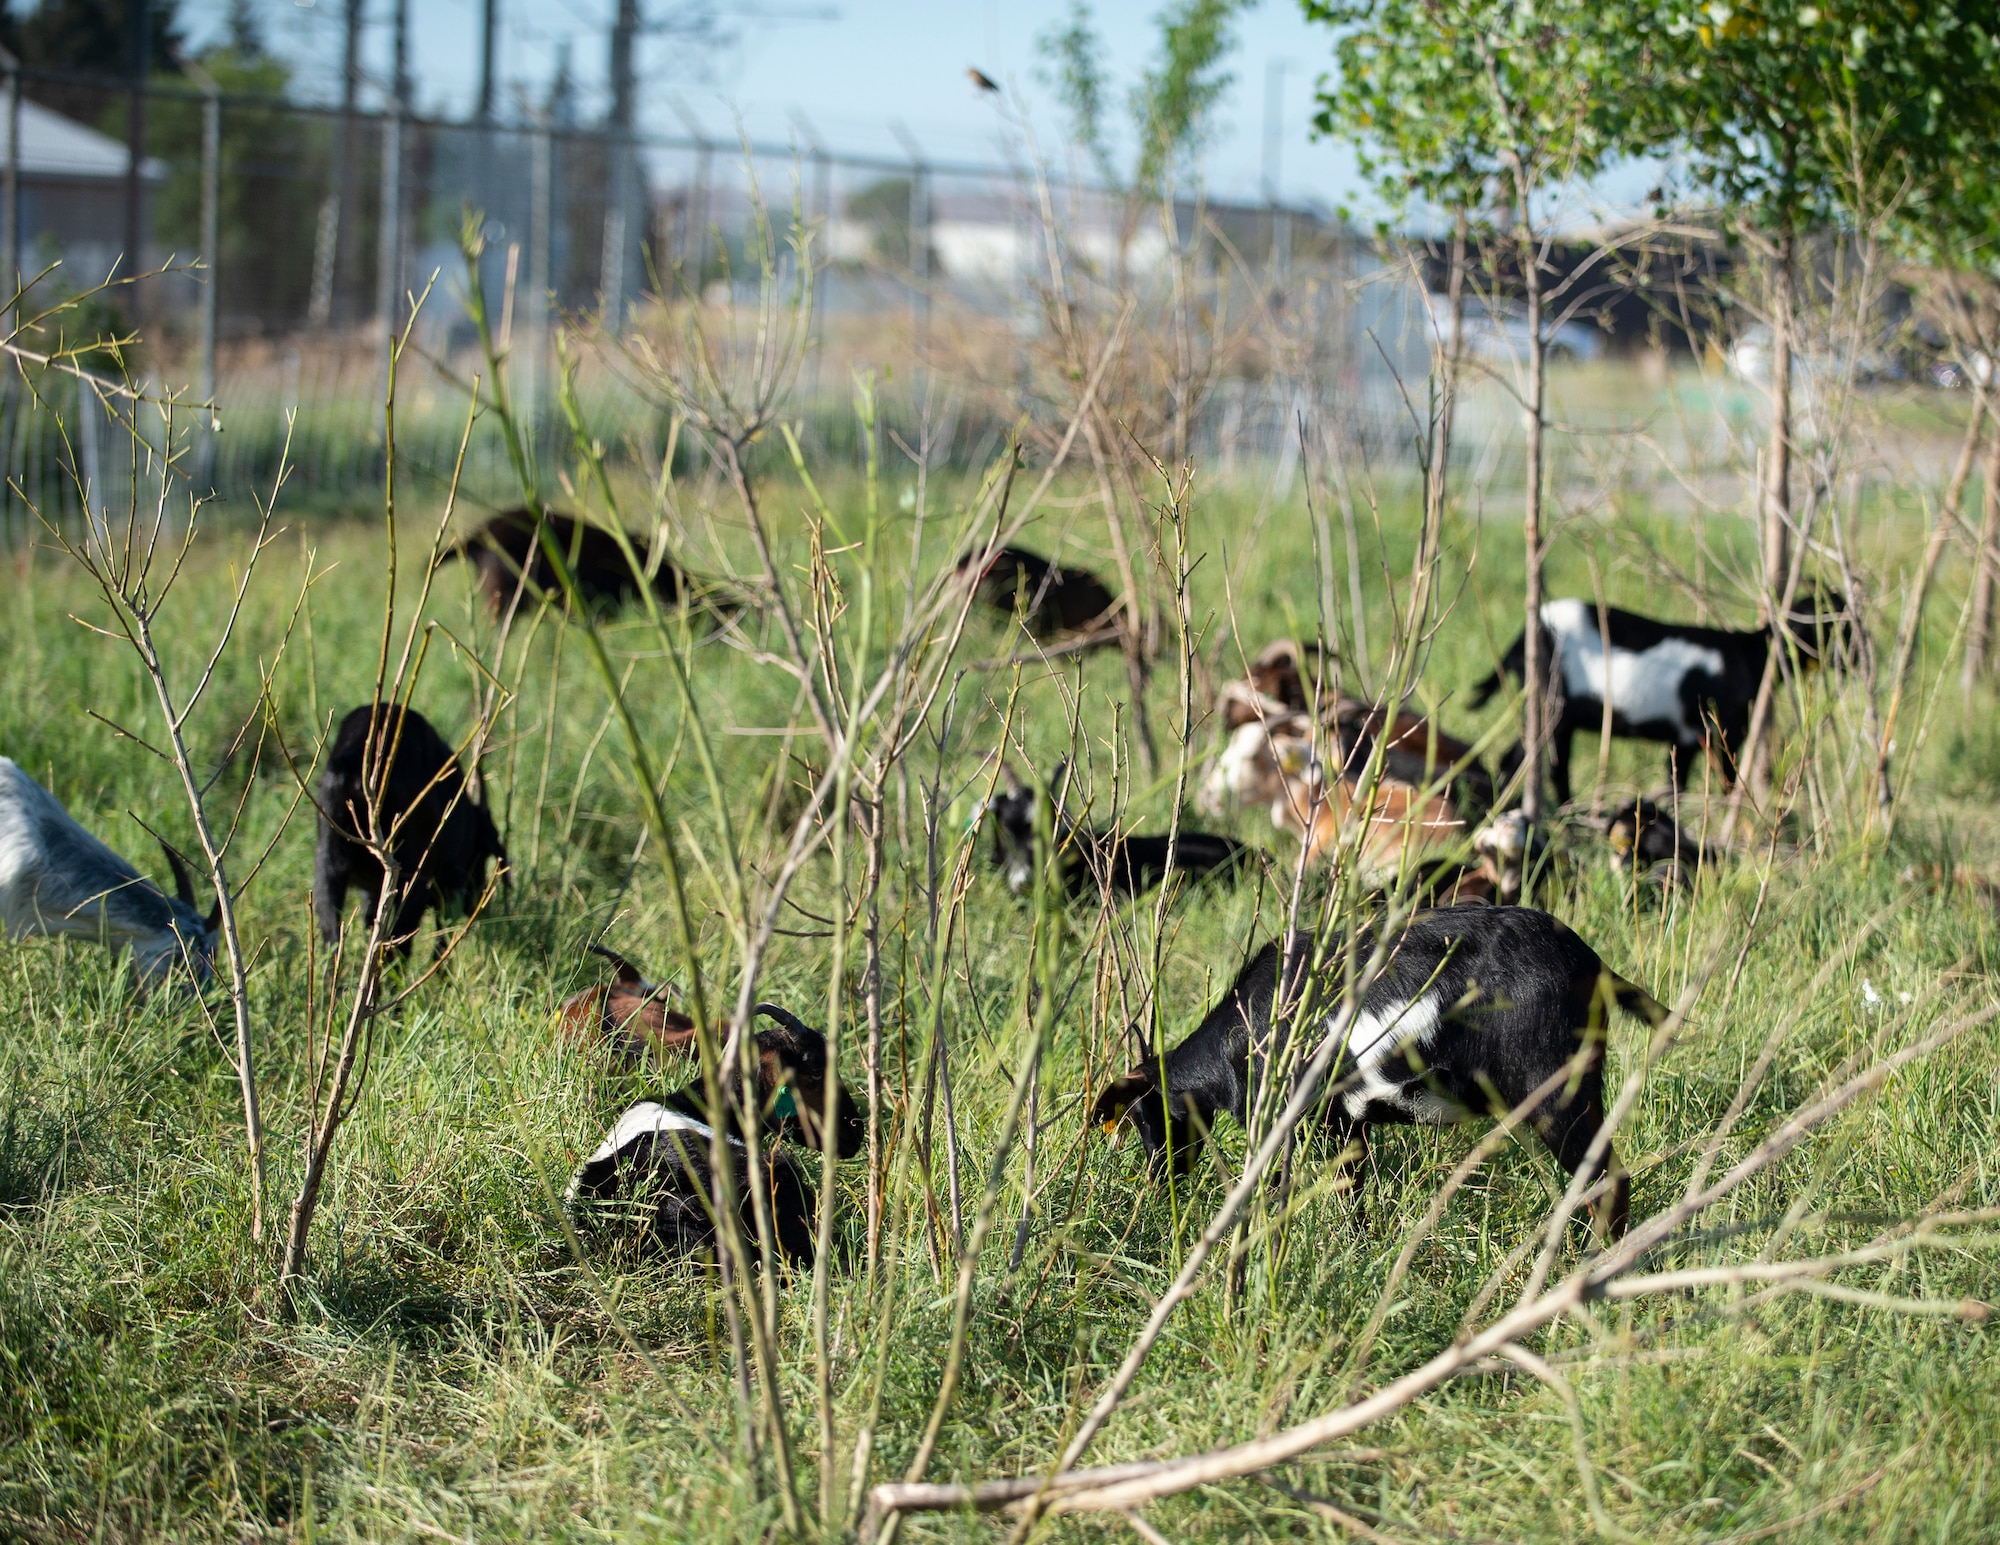 More than 27 goats returned to maintain the natural prairie grass restoration project at the 133rd Airlift Wing in St. Paul, Minn., July 14, 2022. The goats provide the essential maintenance that a natural setting requires in the most ecologically friendly way.